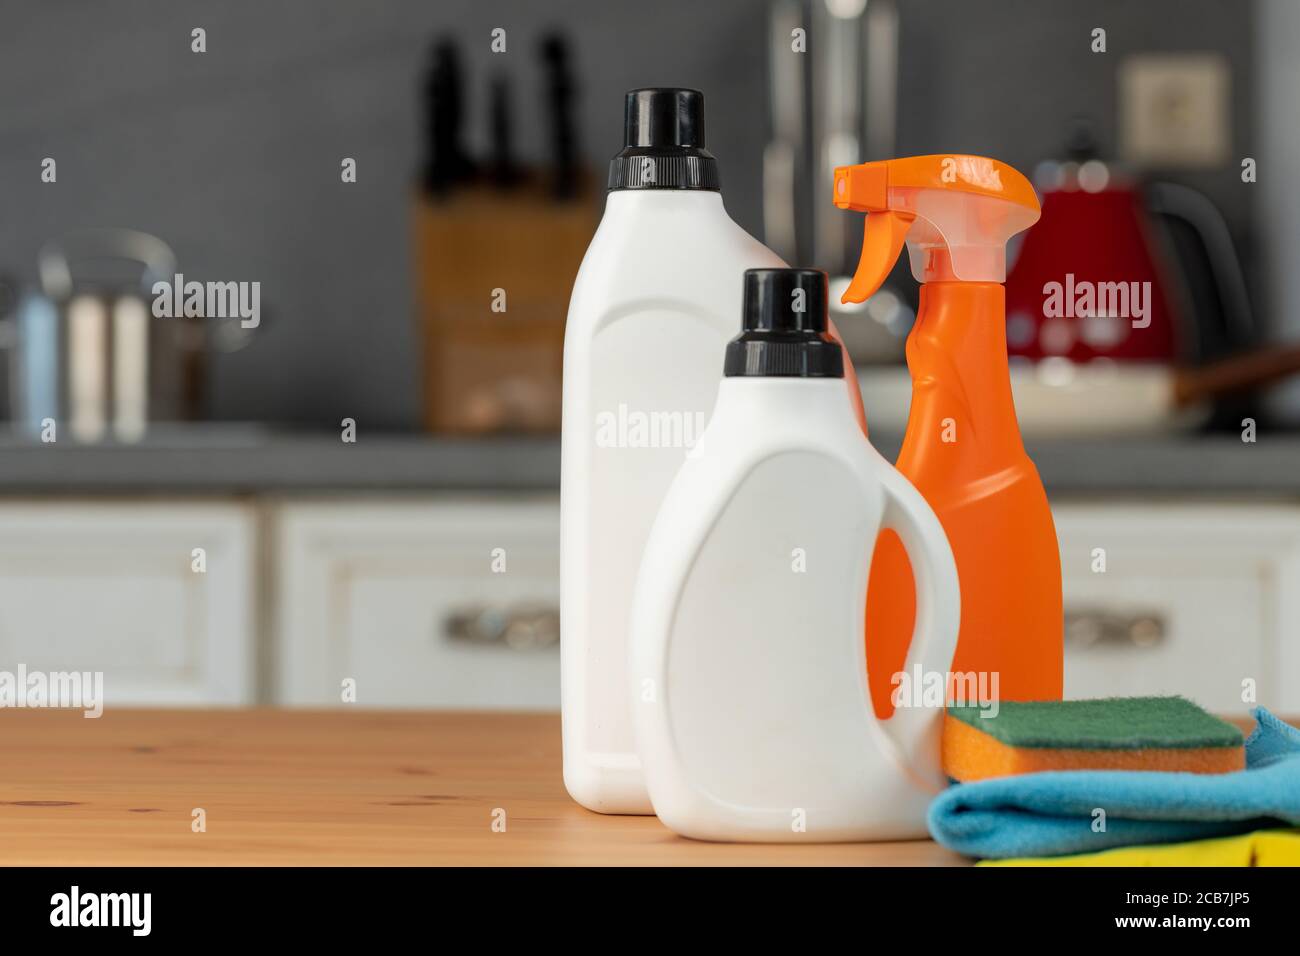 https://c8.alamy.com/comp/2CB7JP5/cleaning-detergents-and-tools-on-a-kitchen-counter-2CB7JP5.jpg